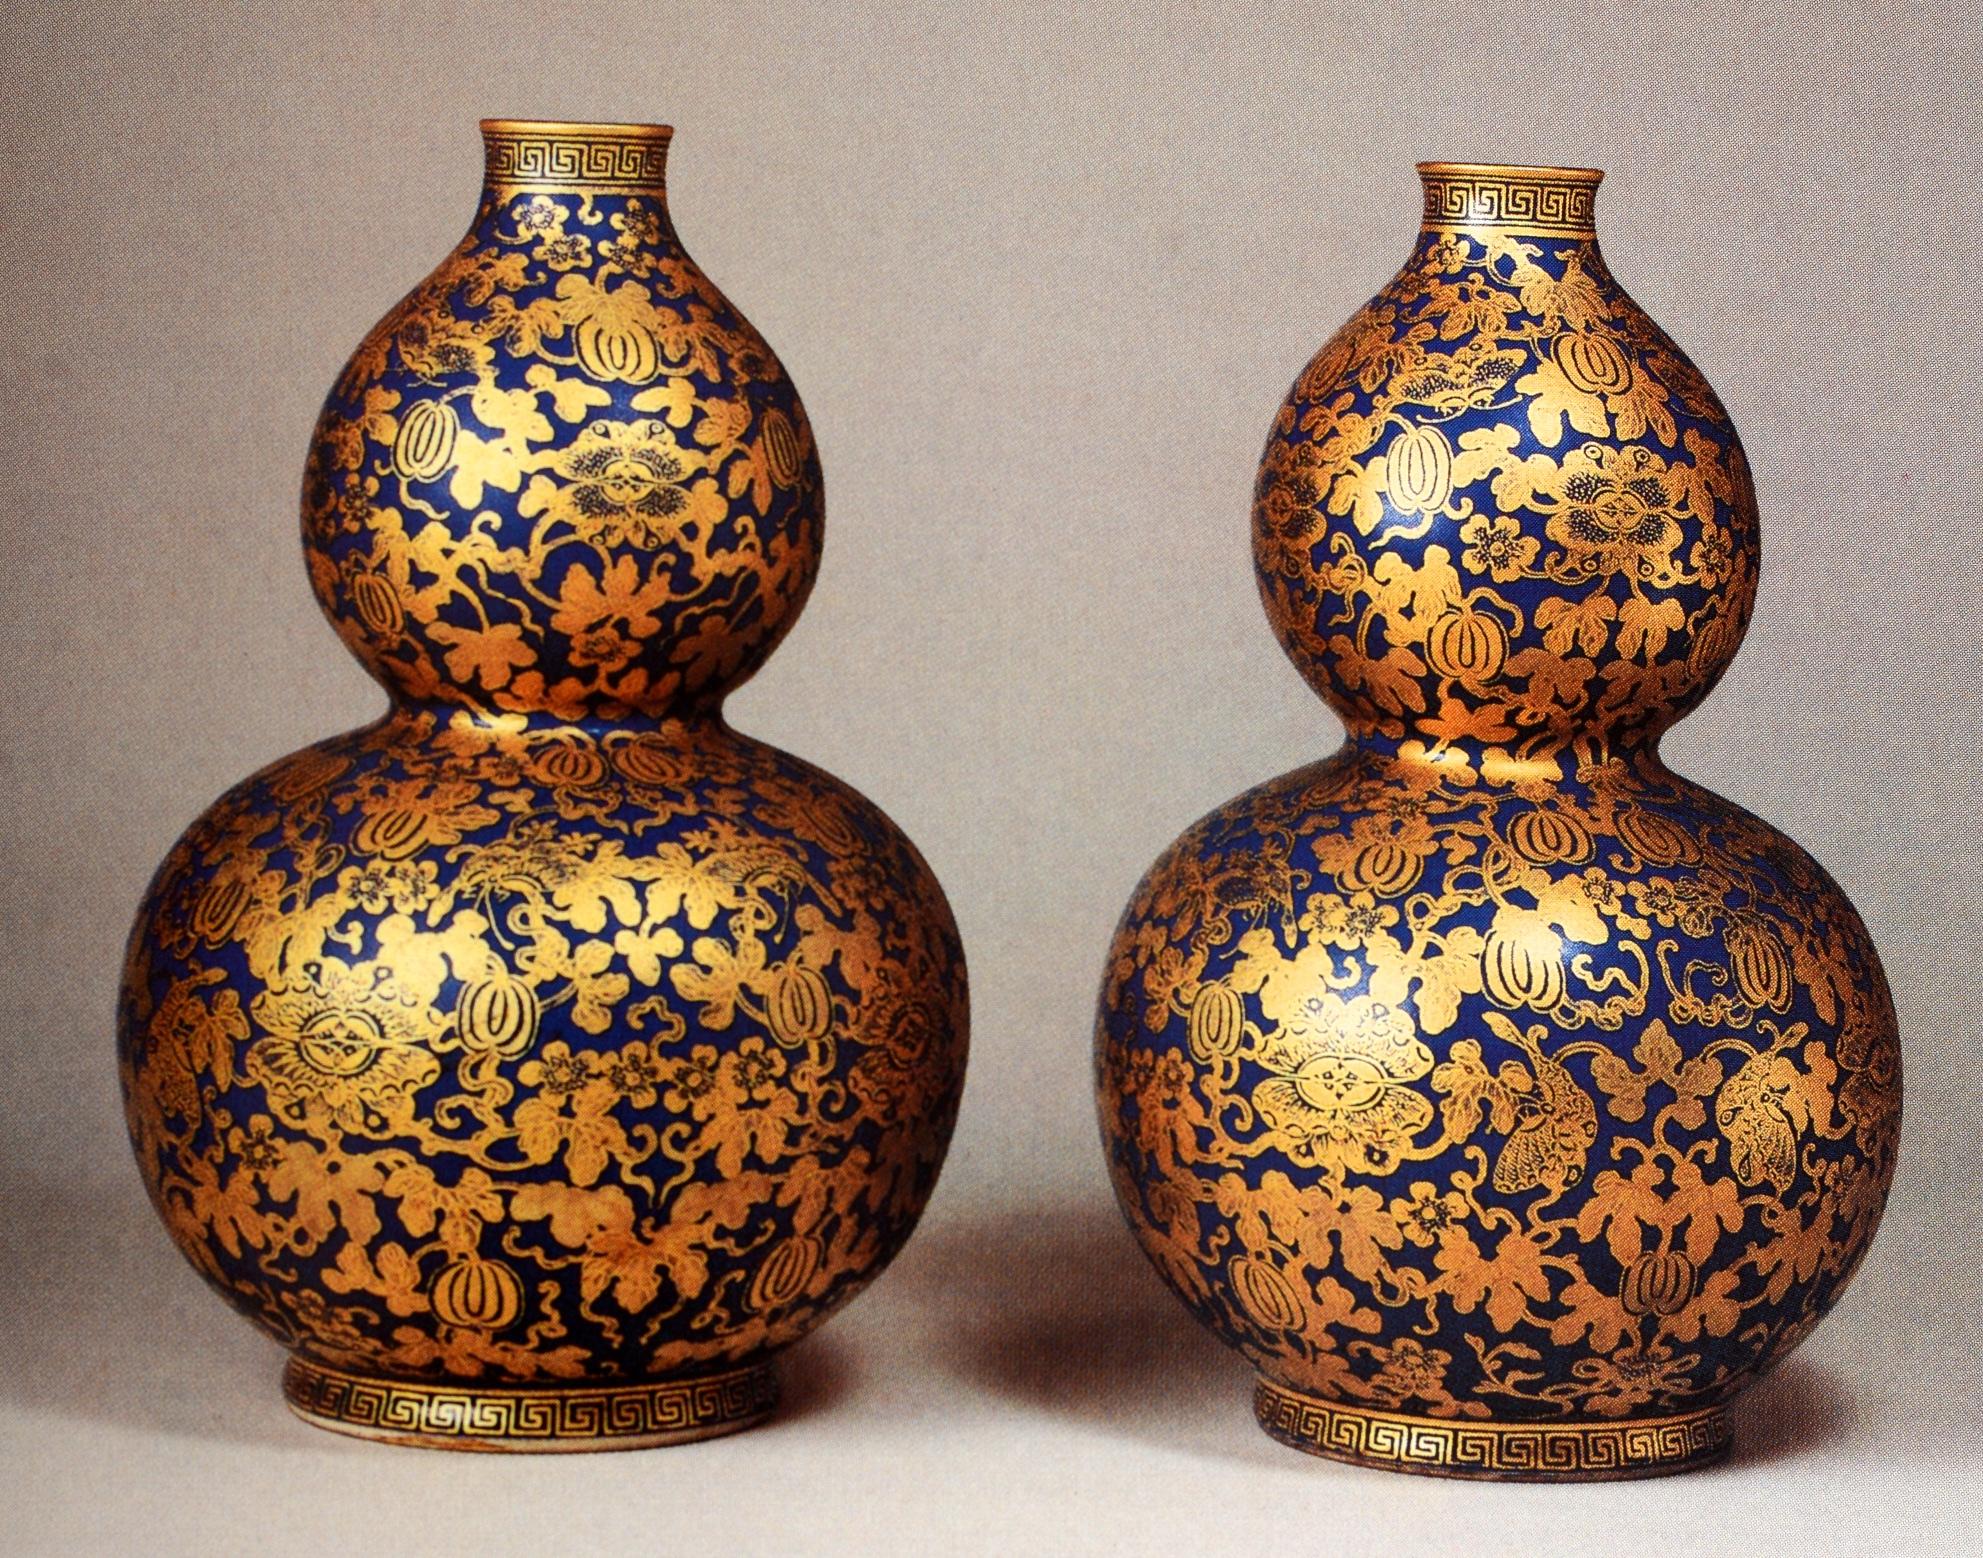 Paper Sotheby's Important Chinese Ceramics from the J. M. Hu Family Collection, 1985 For Sale